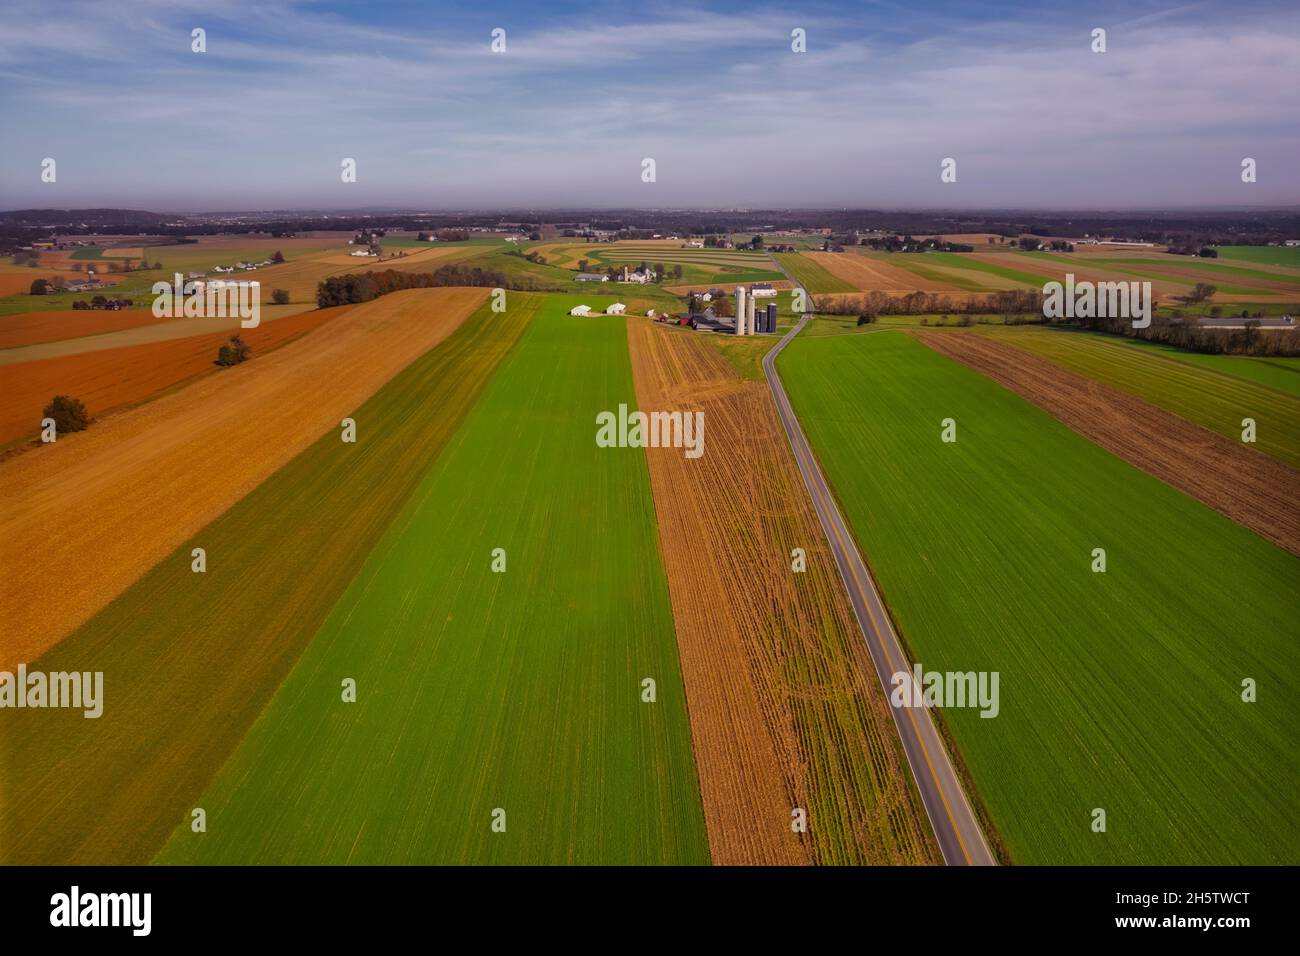 Lancaster Pennsylvania Aerial - Recently harvested fields view from above. Beautiful warm tones in the landscape  show the abstract farmland design pa Stock Photo